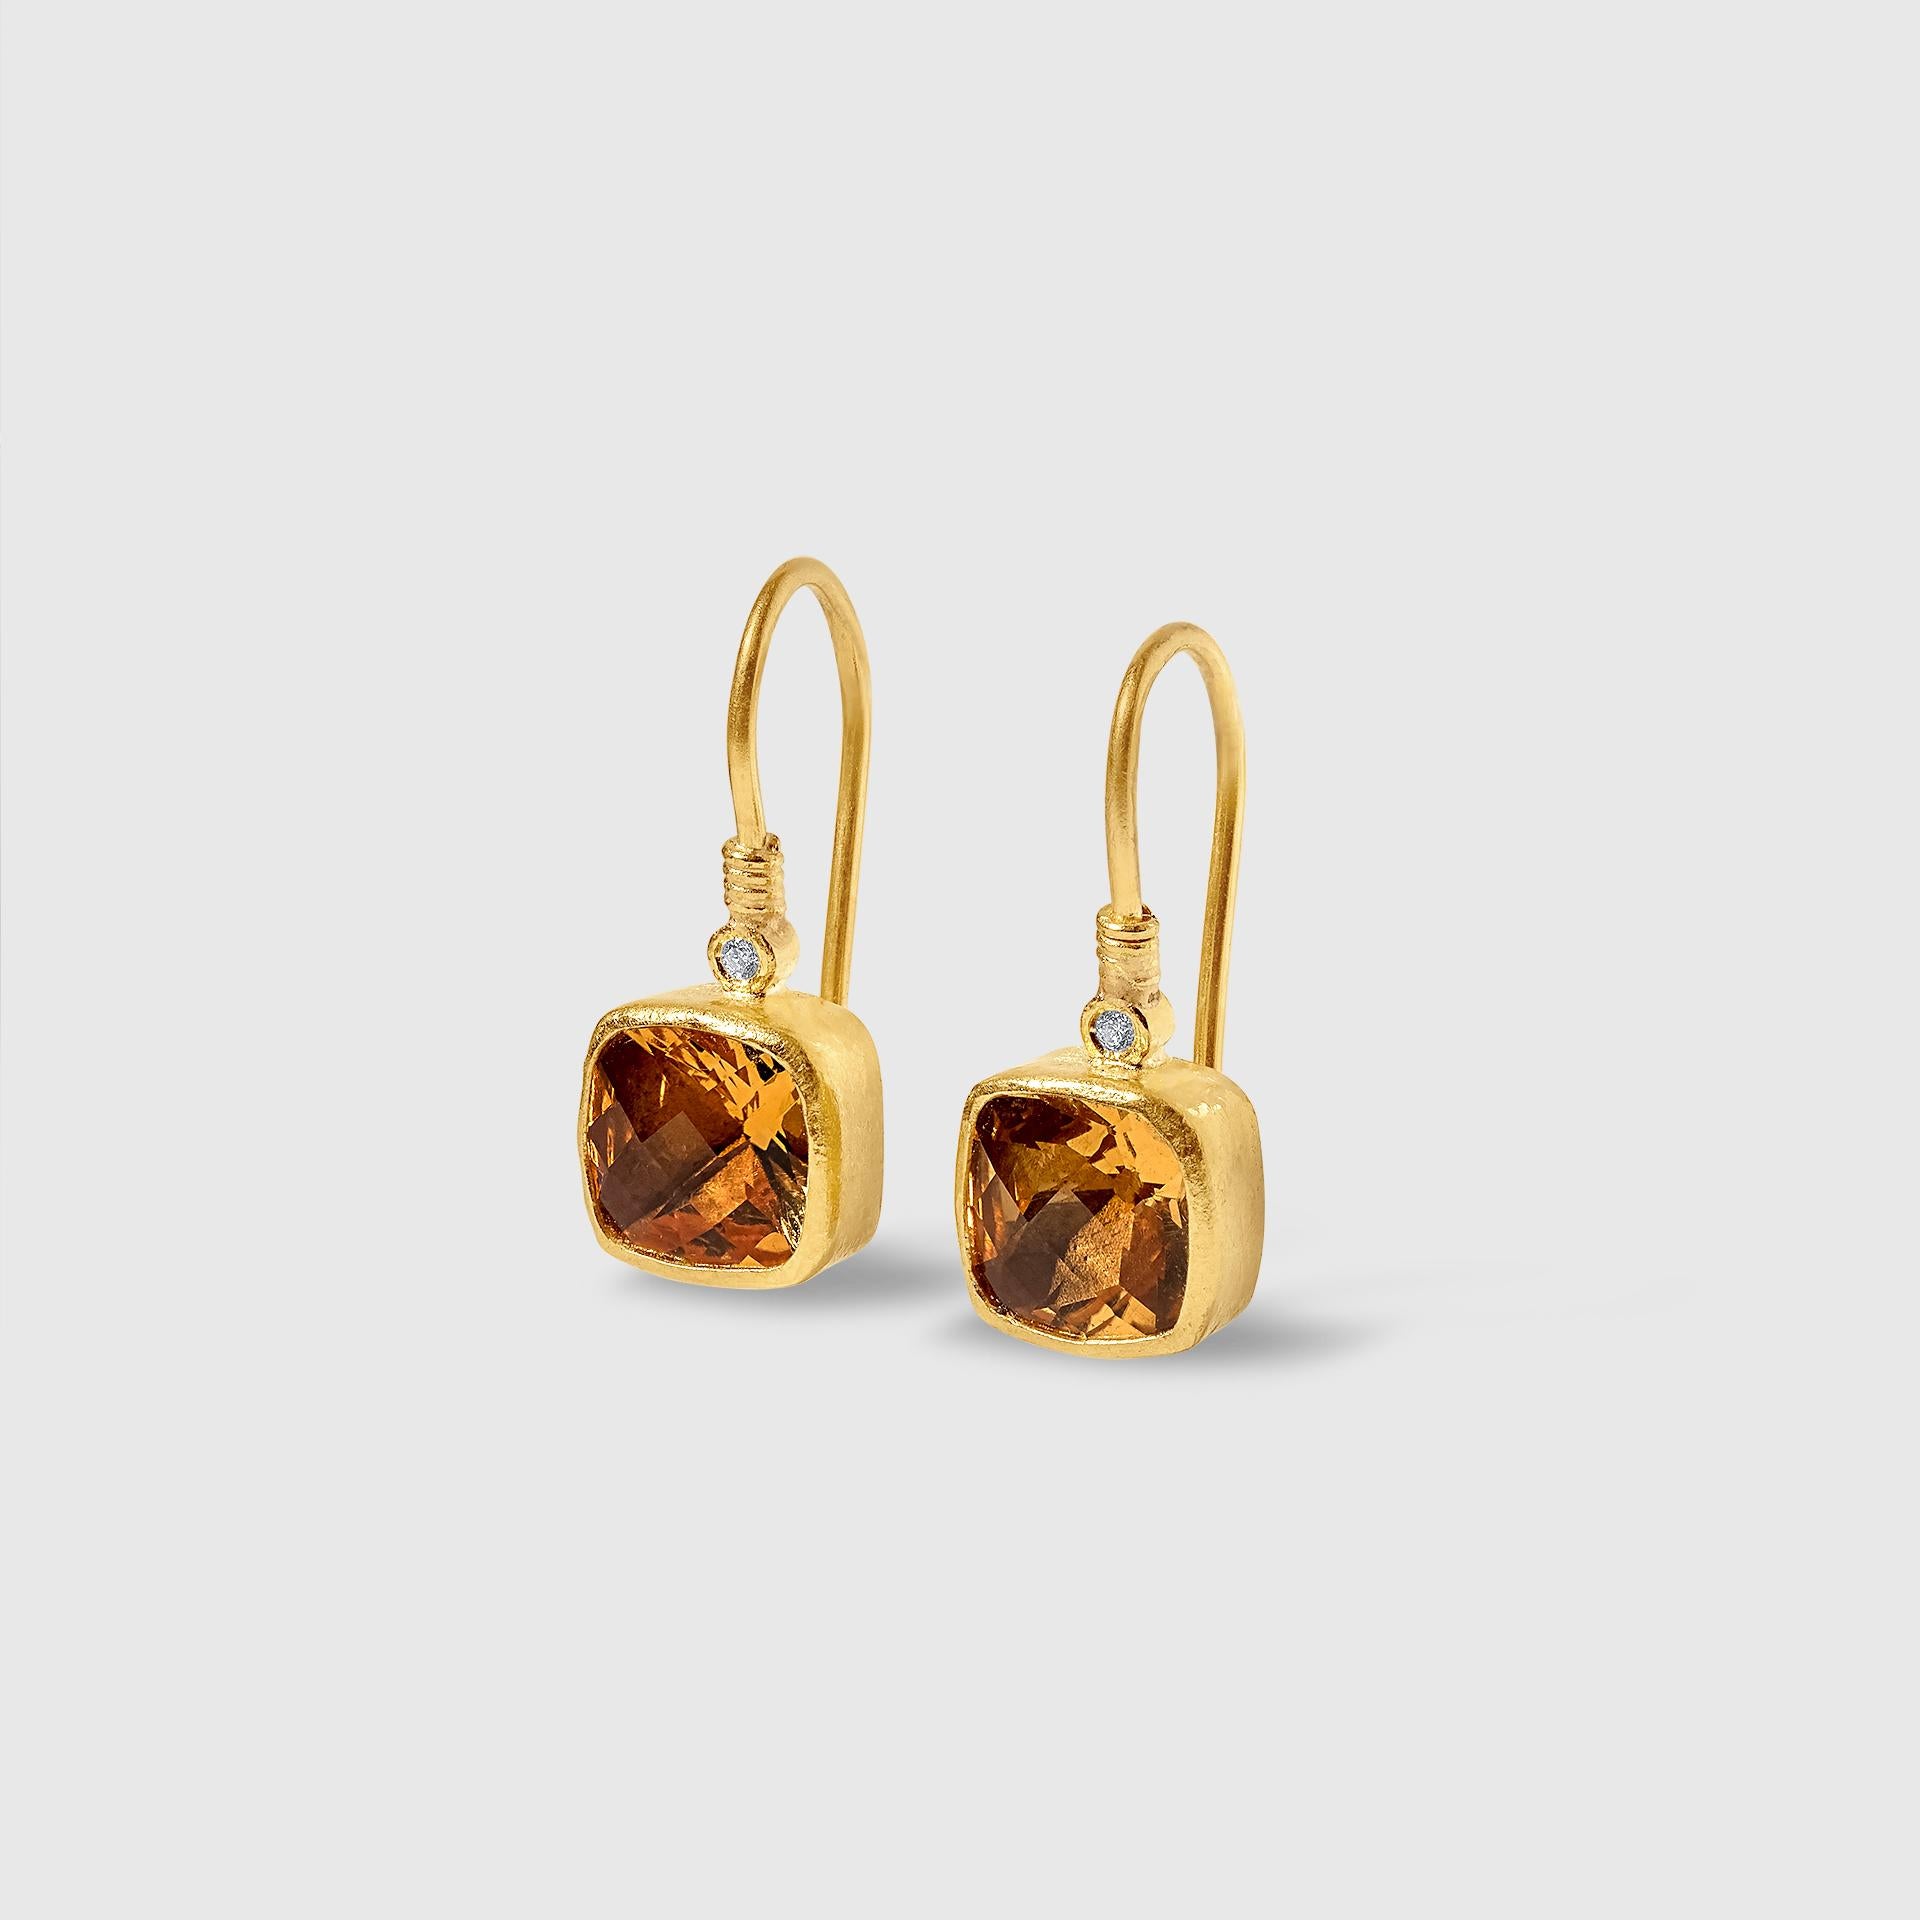 Faceted Checkerboard Citrine Earrings with Diamond Detail in 24kt Gold by Prehistoric Works of Istanbul, Turkey. Length: 22mm (.85